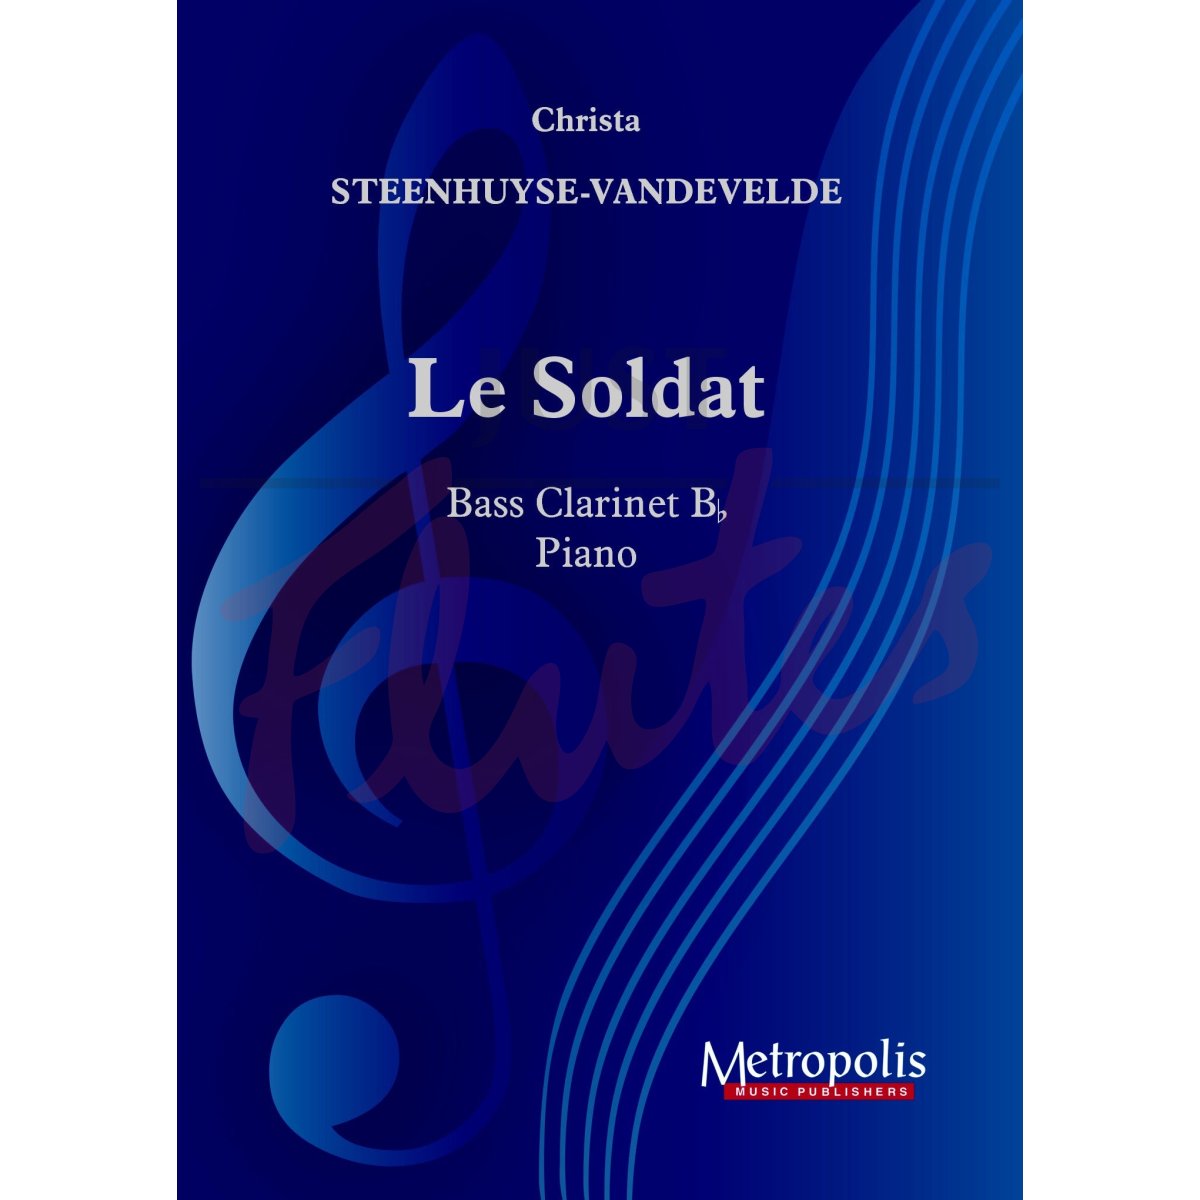 Le Soldat for Bass Clarinet and Piano